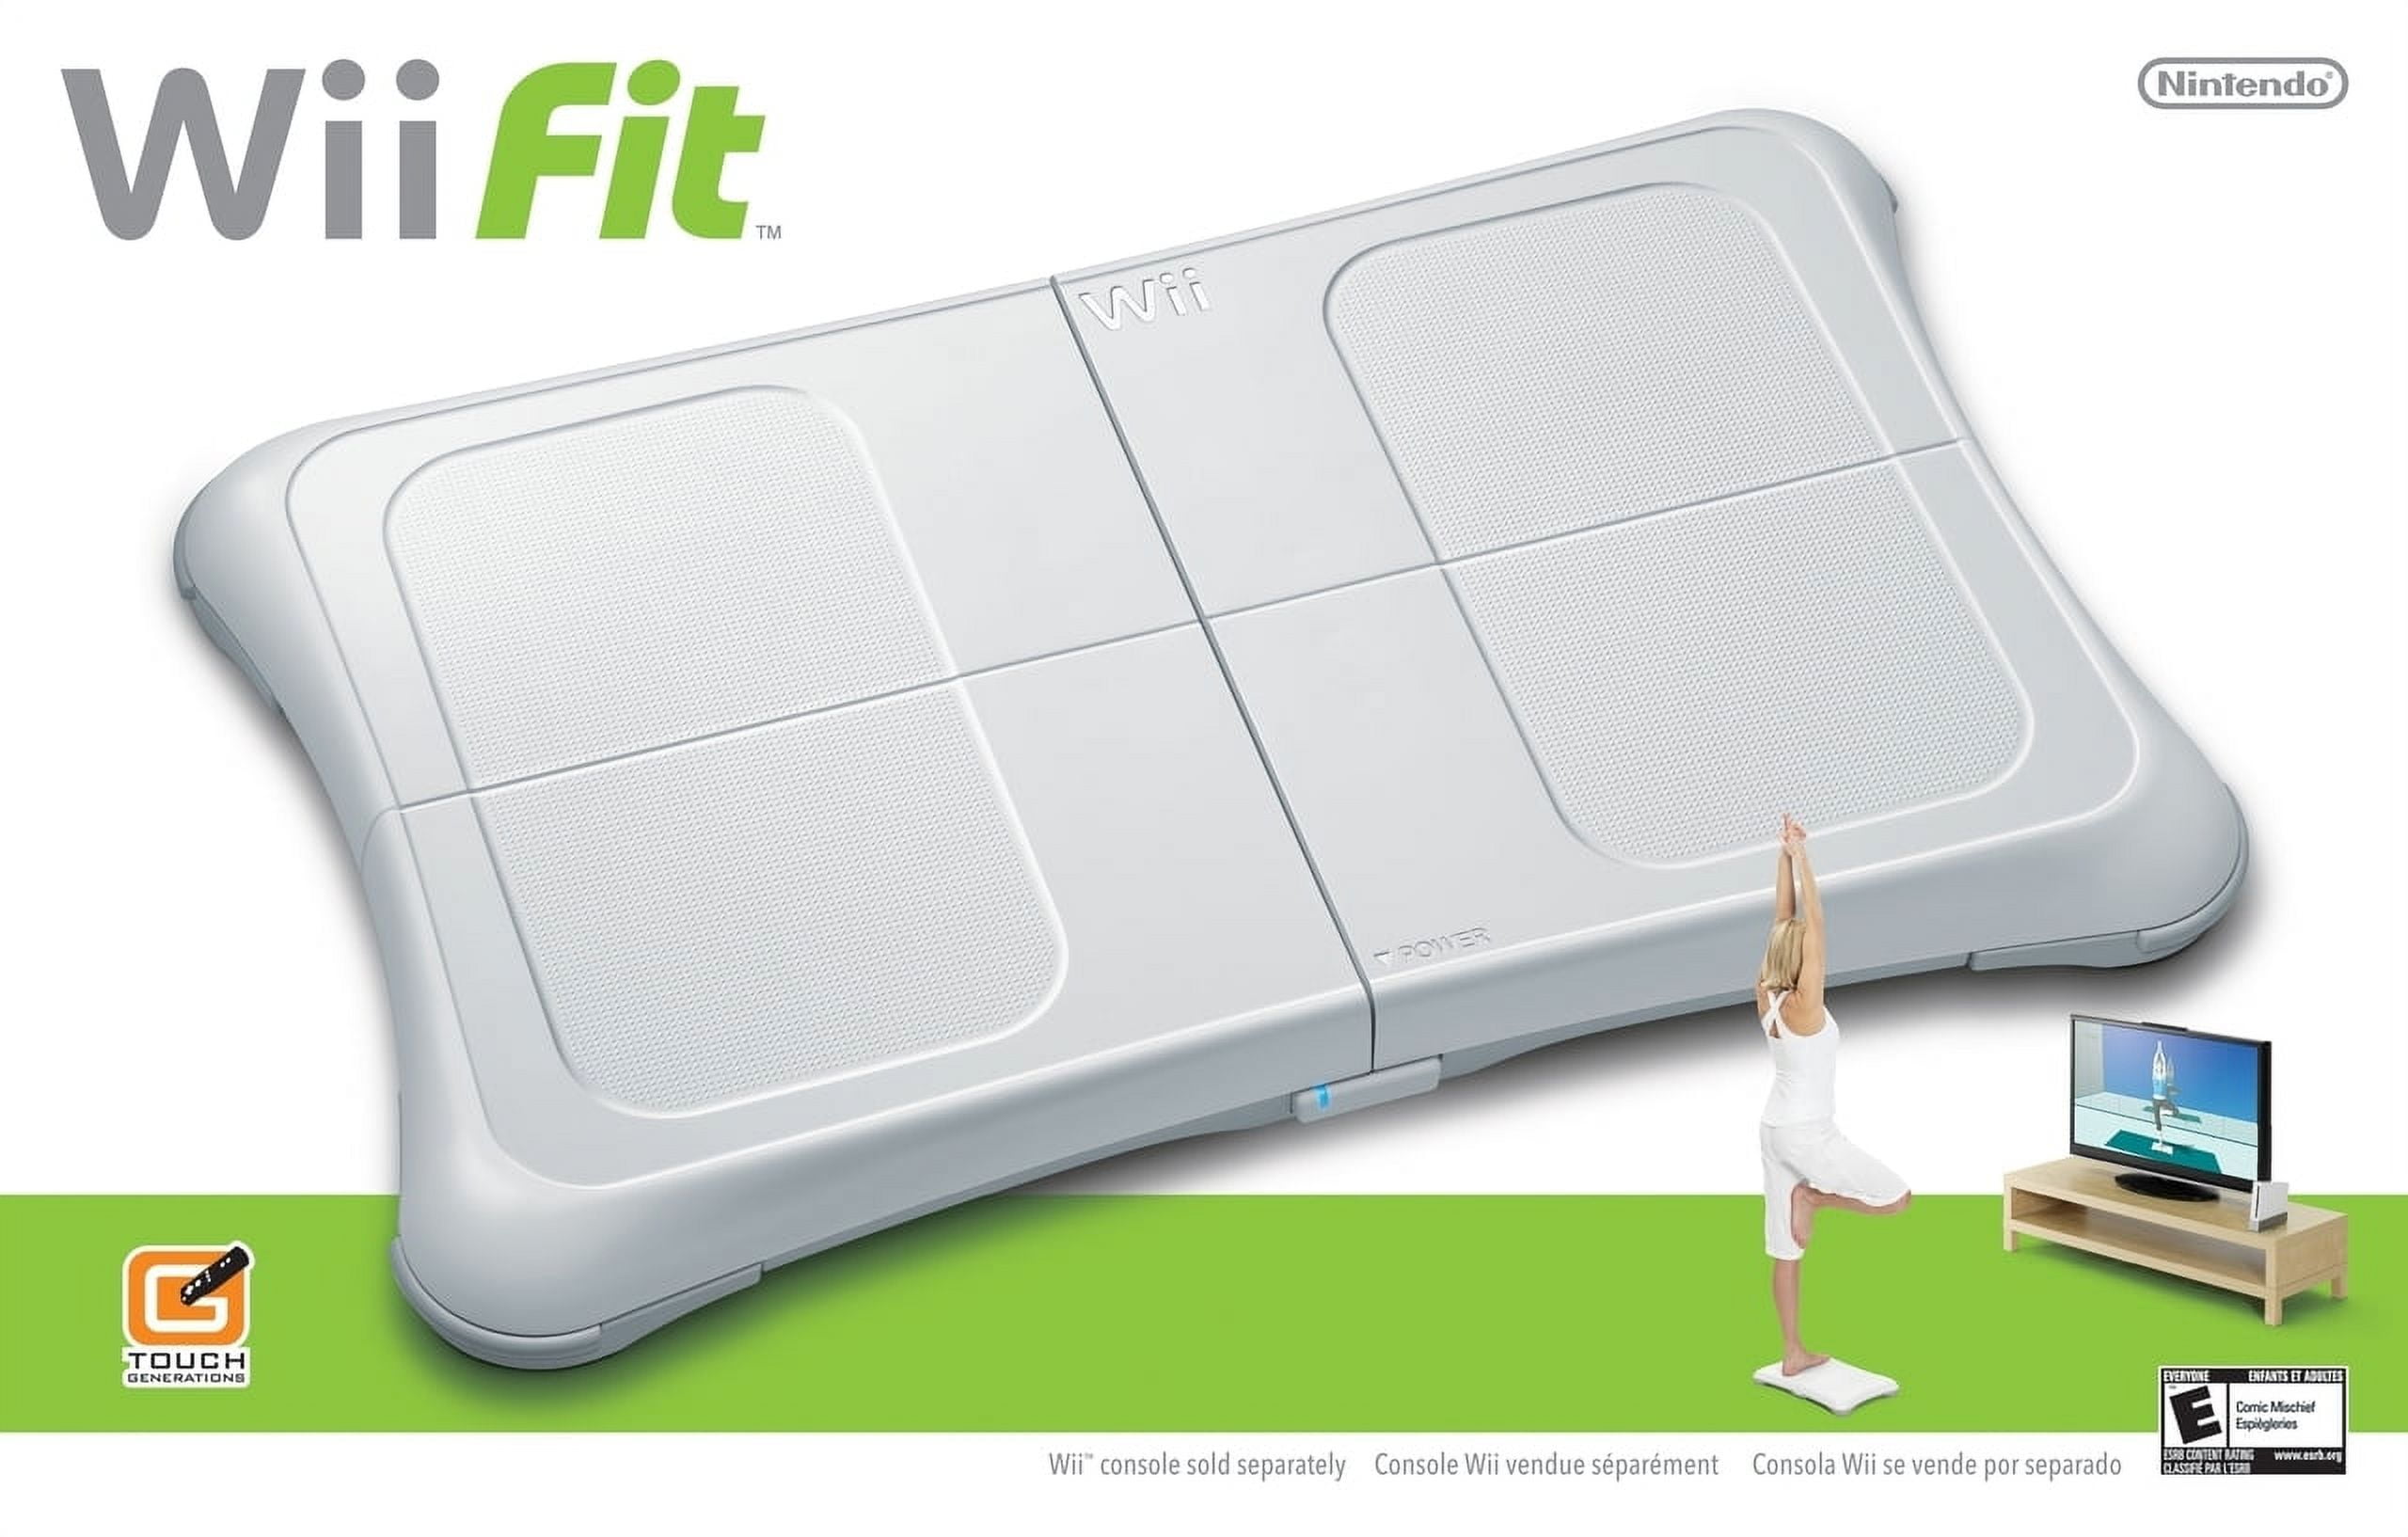 Wii Fit Game with Wii Balance Board - (Used)